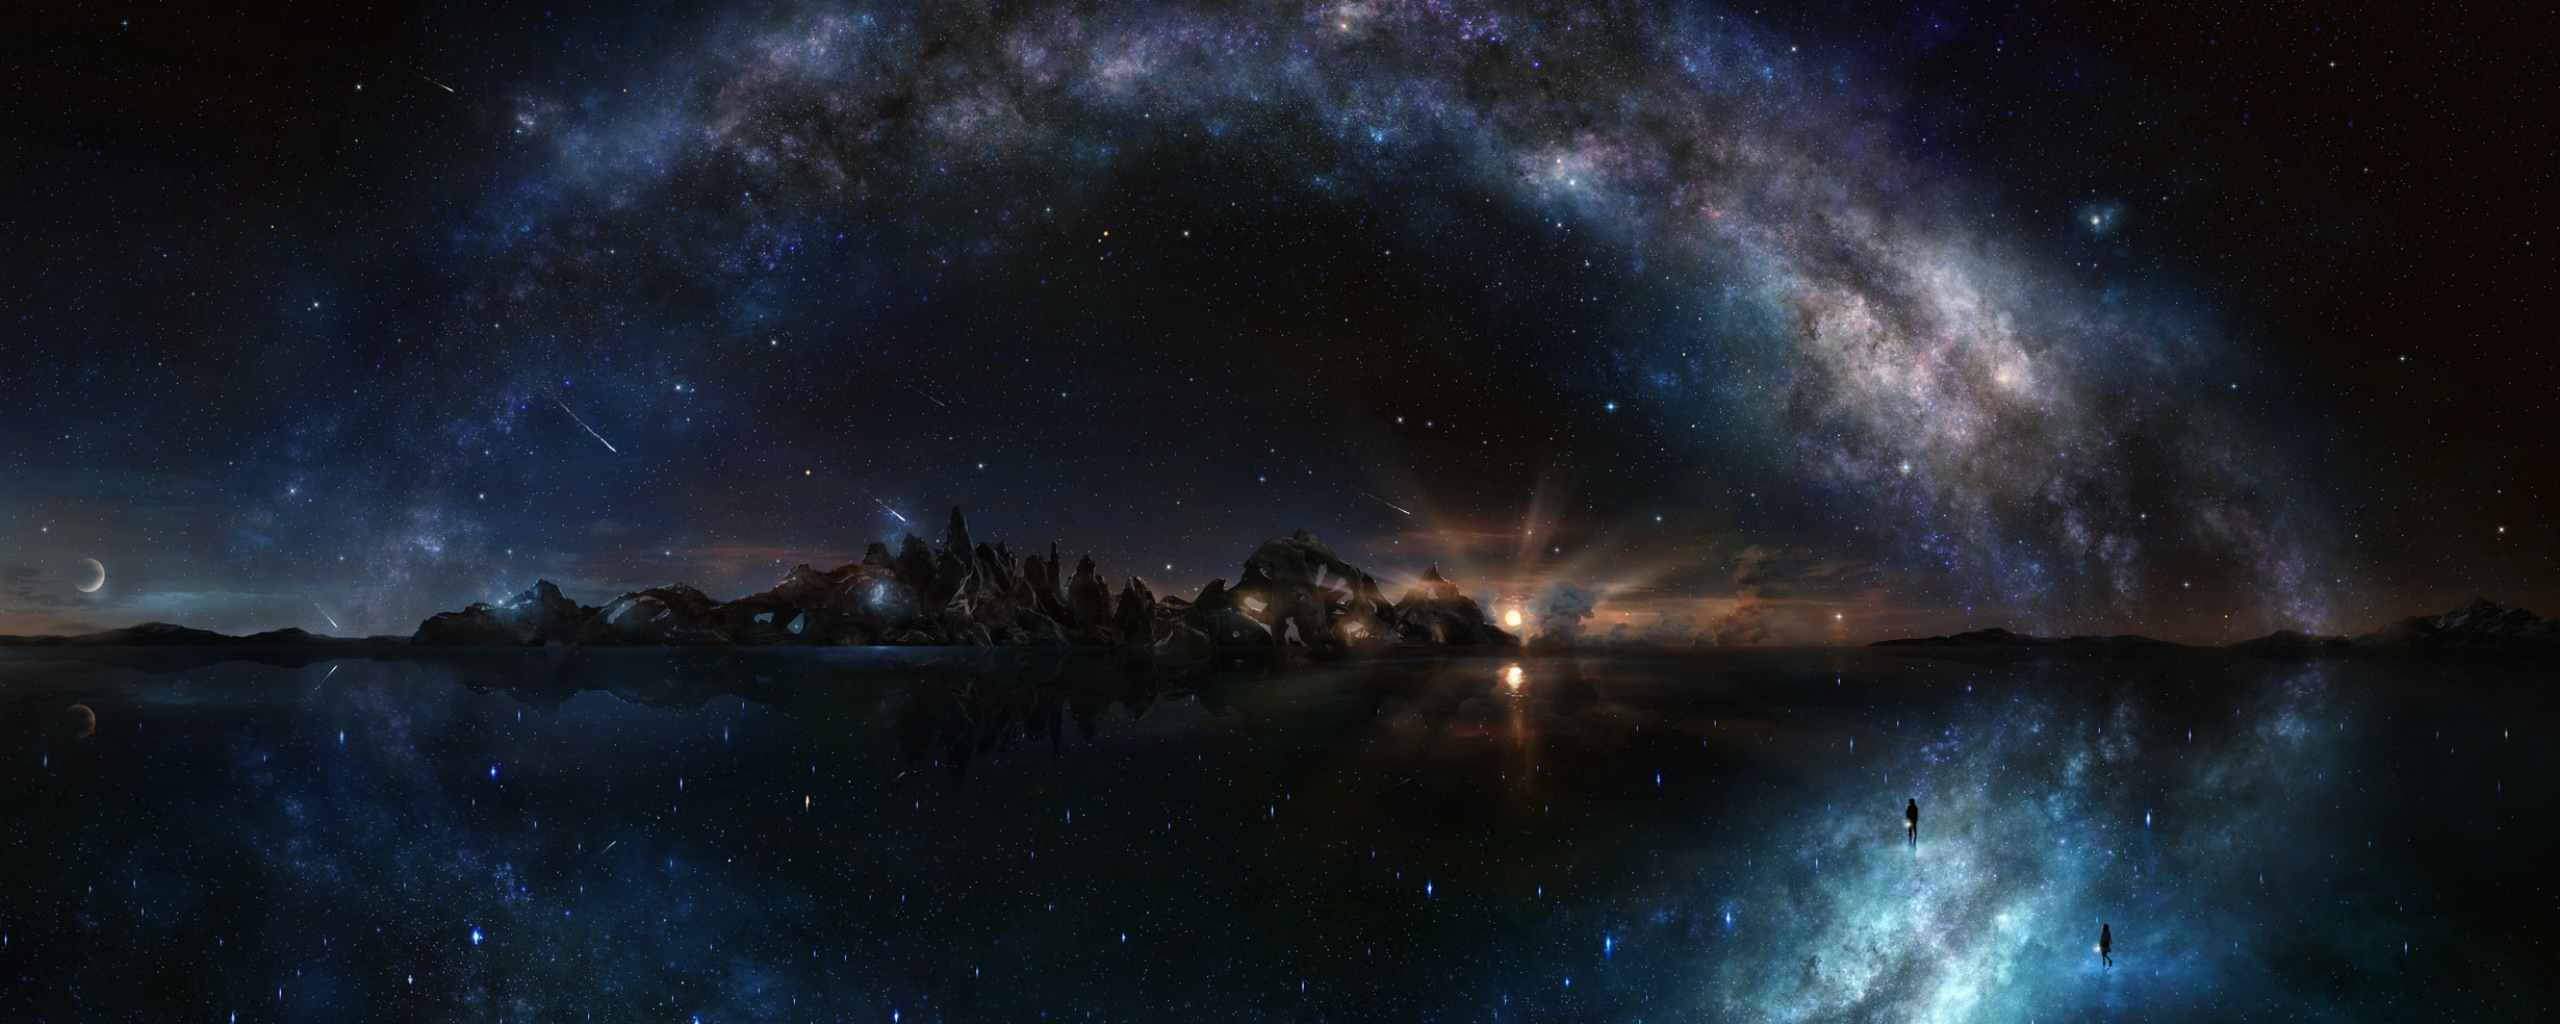 4K Dual Monitor Wallpaper,Sky,Nature,Outer Space,Atmosphere,Night